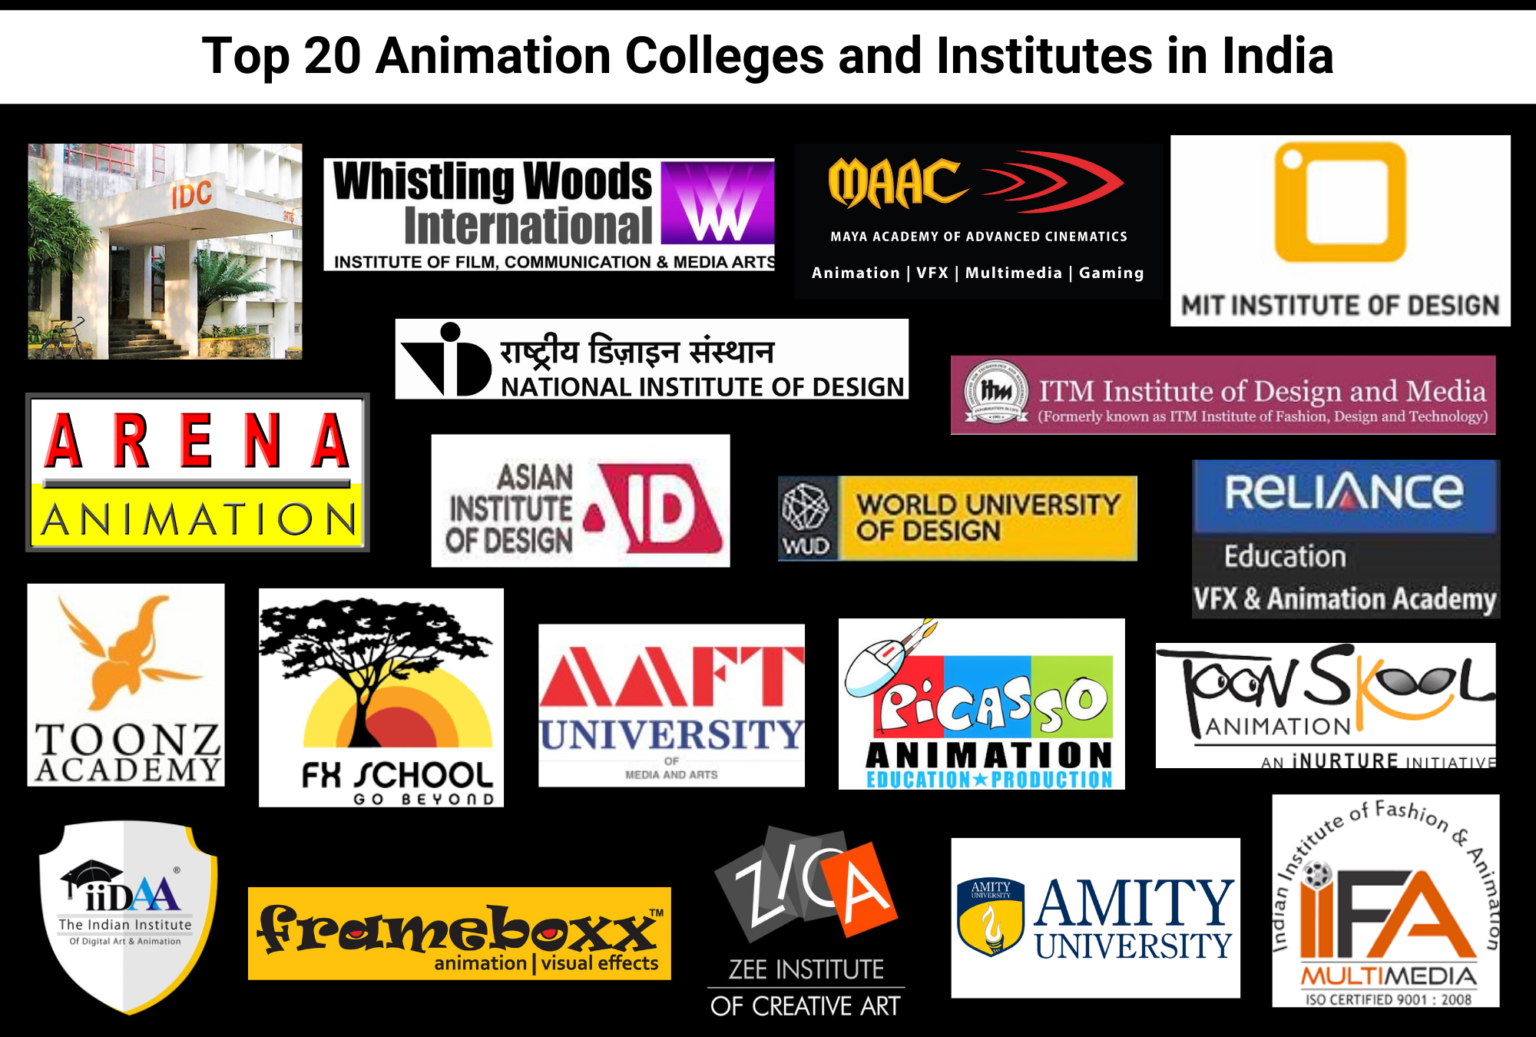 Top Animation Colleges and Institutes in India